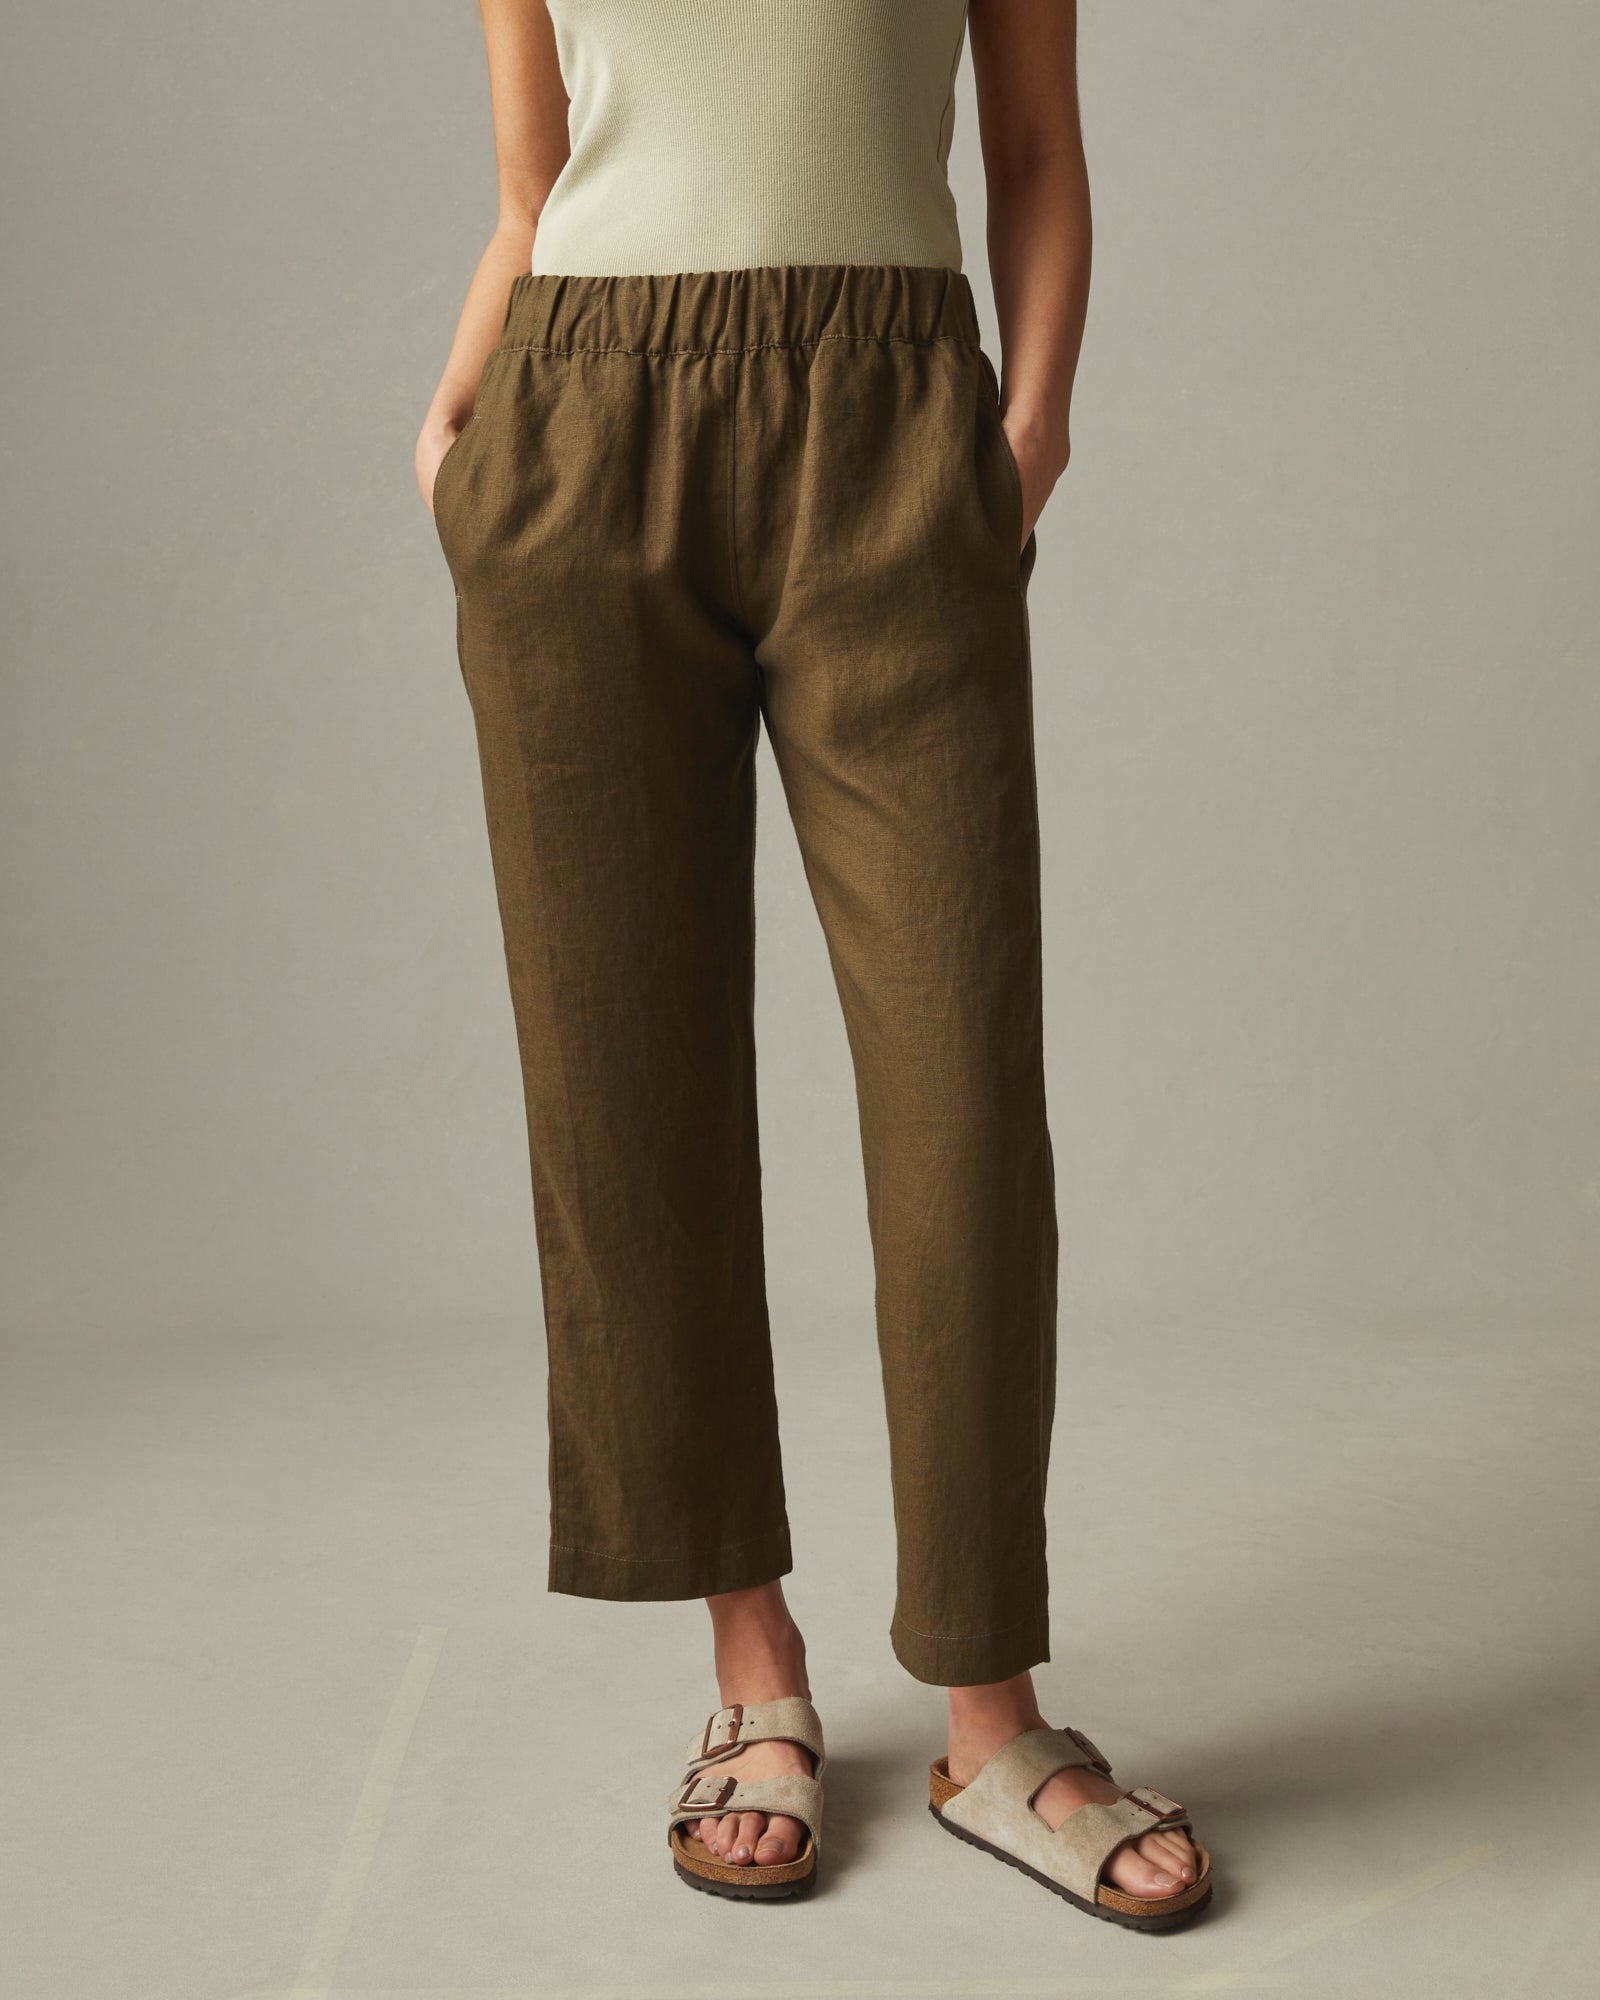 Buy Brown Solid Women Trouser Cotton Flax Fabric for Best Price, Reviews,  Free Shipping